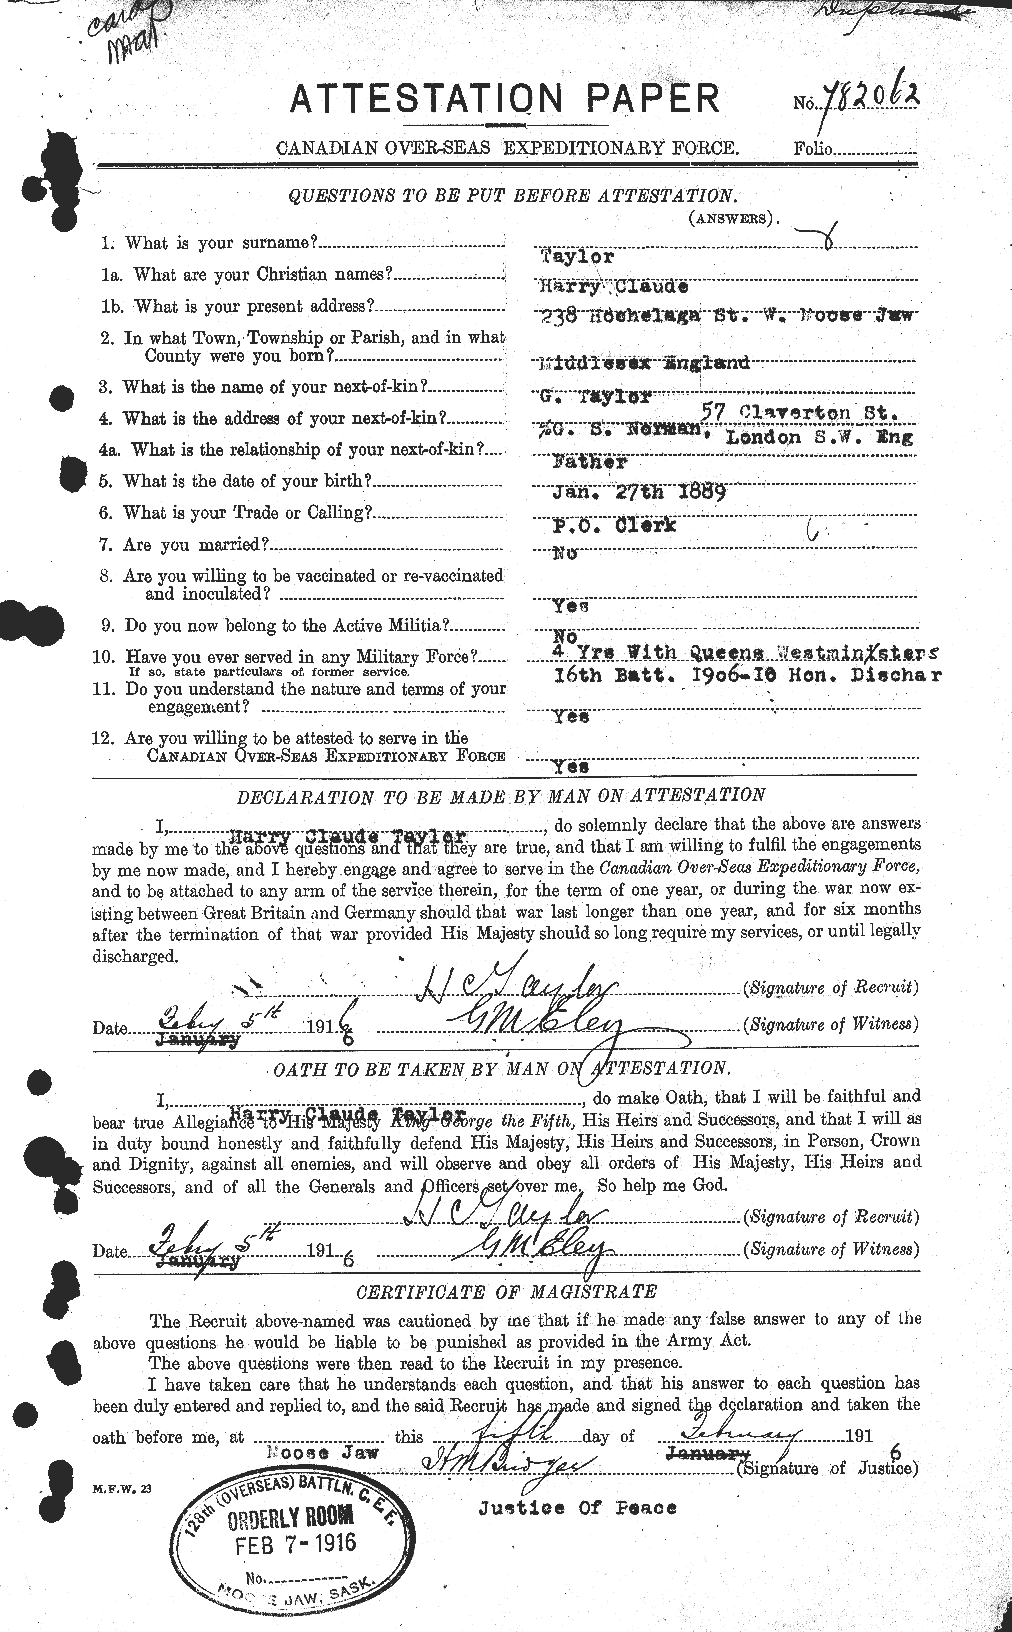 Personnel Records of the First World War - CEF 626487a